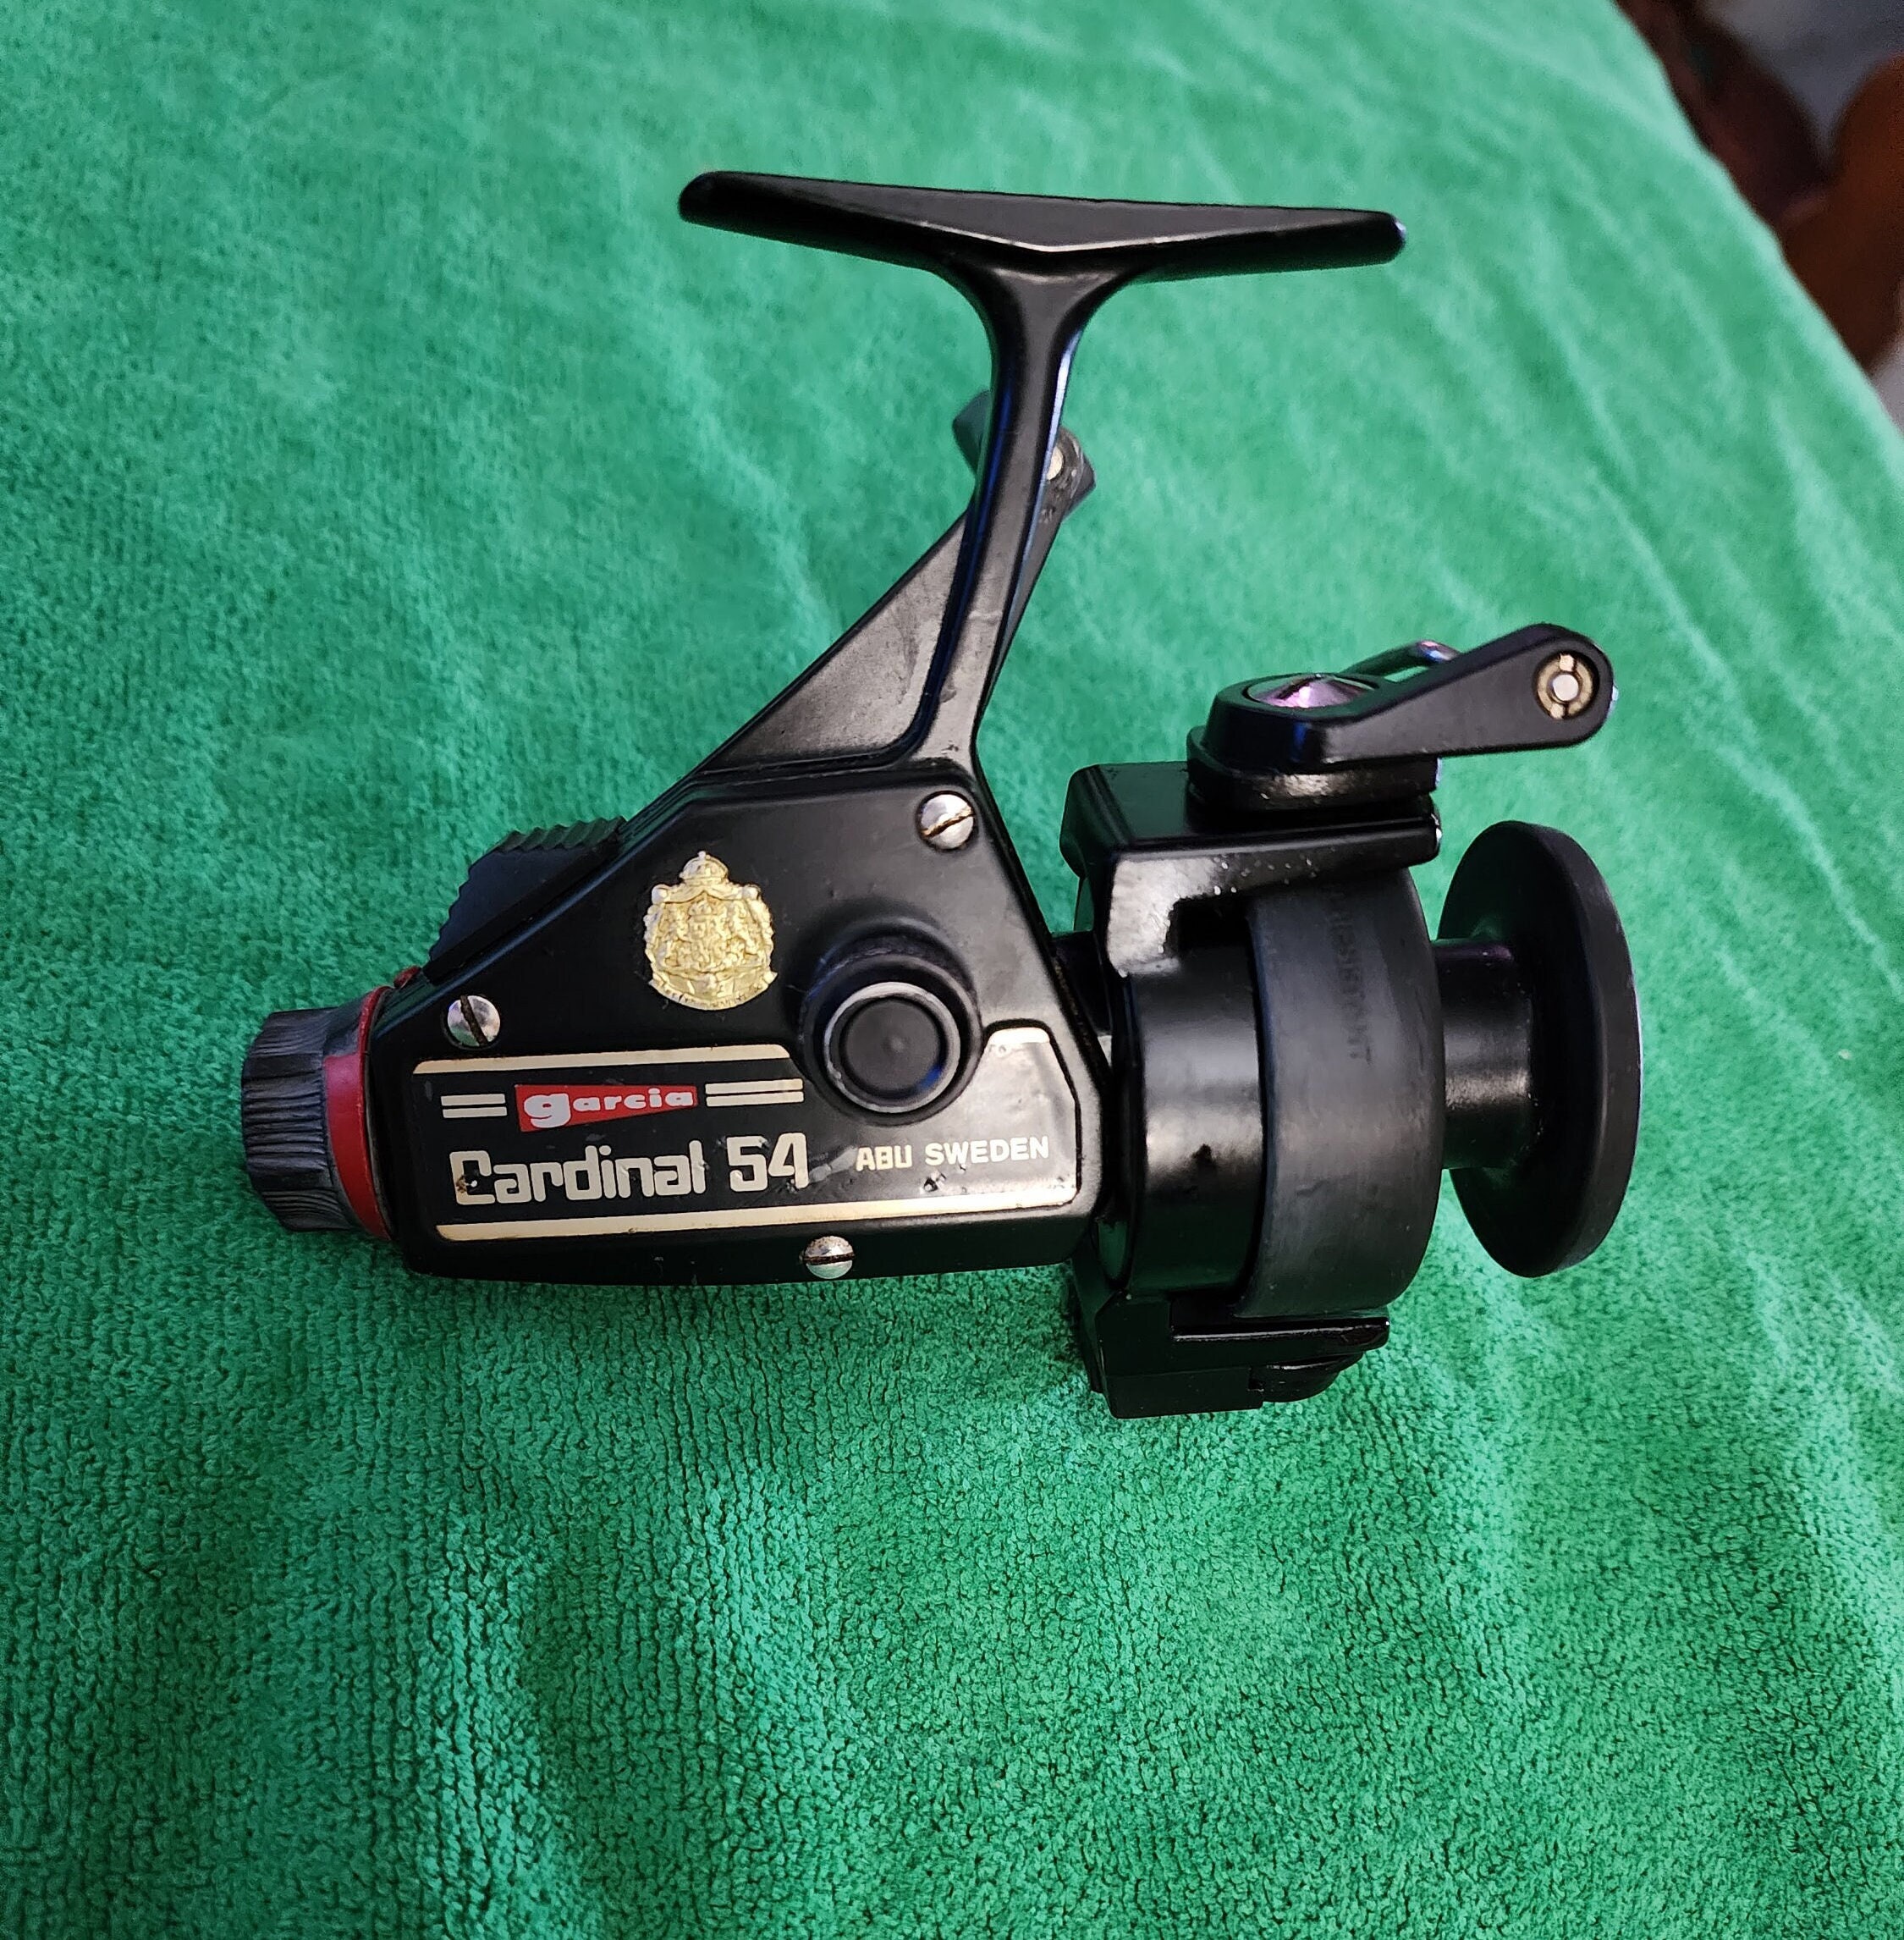 Zebco 4 Cardinal reel. Tag us in your vintage Zebco reels for a chance to  be featured? #KeepItReelMondays 📸@thenaturalistriverside